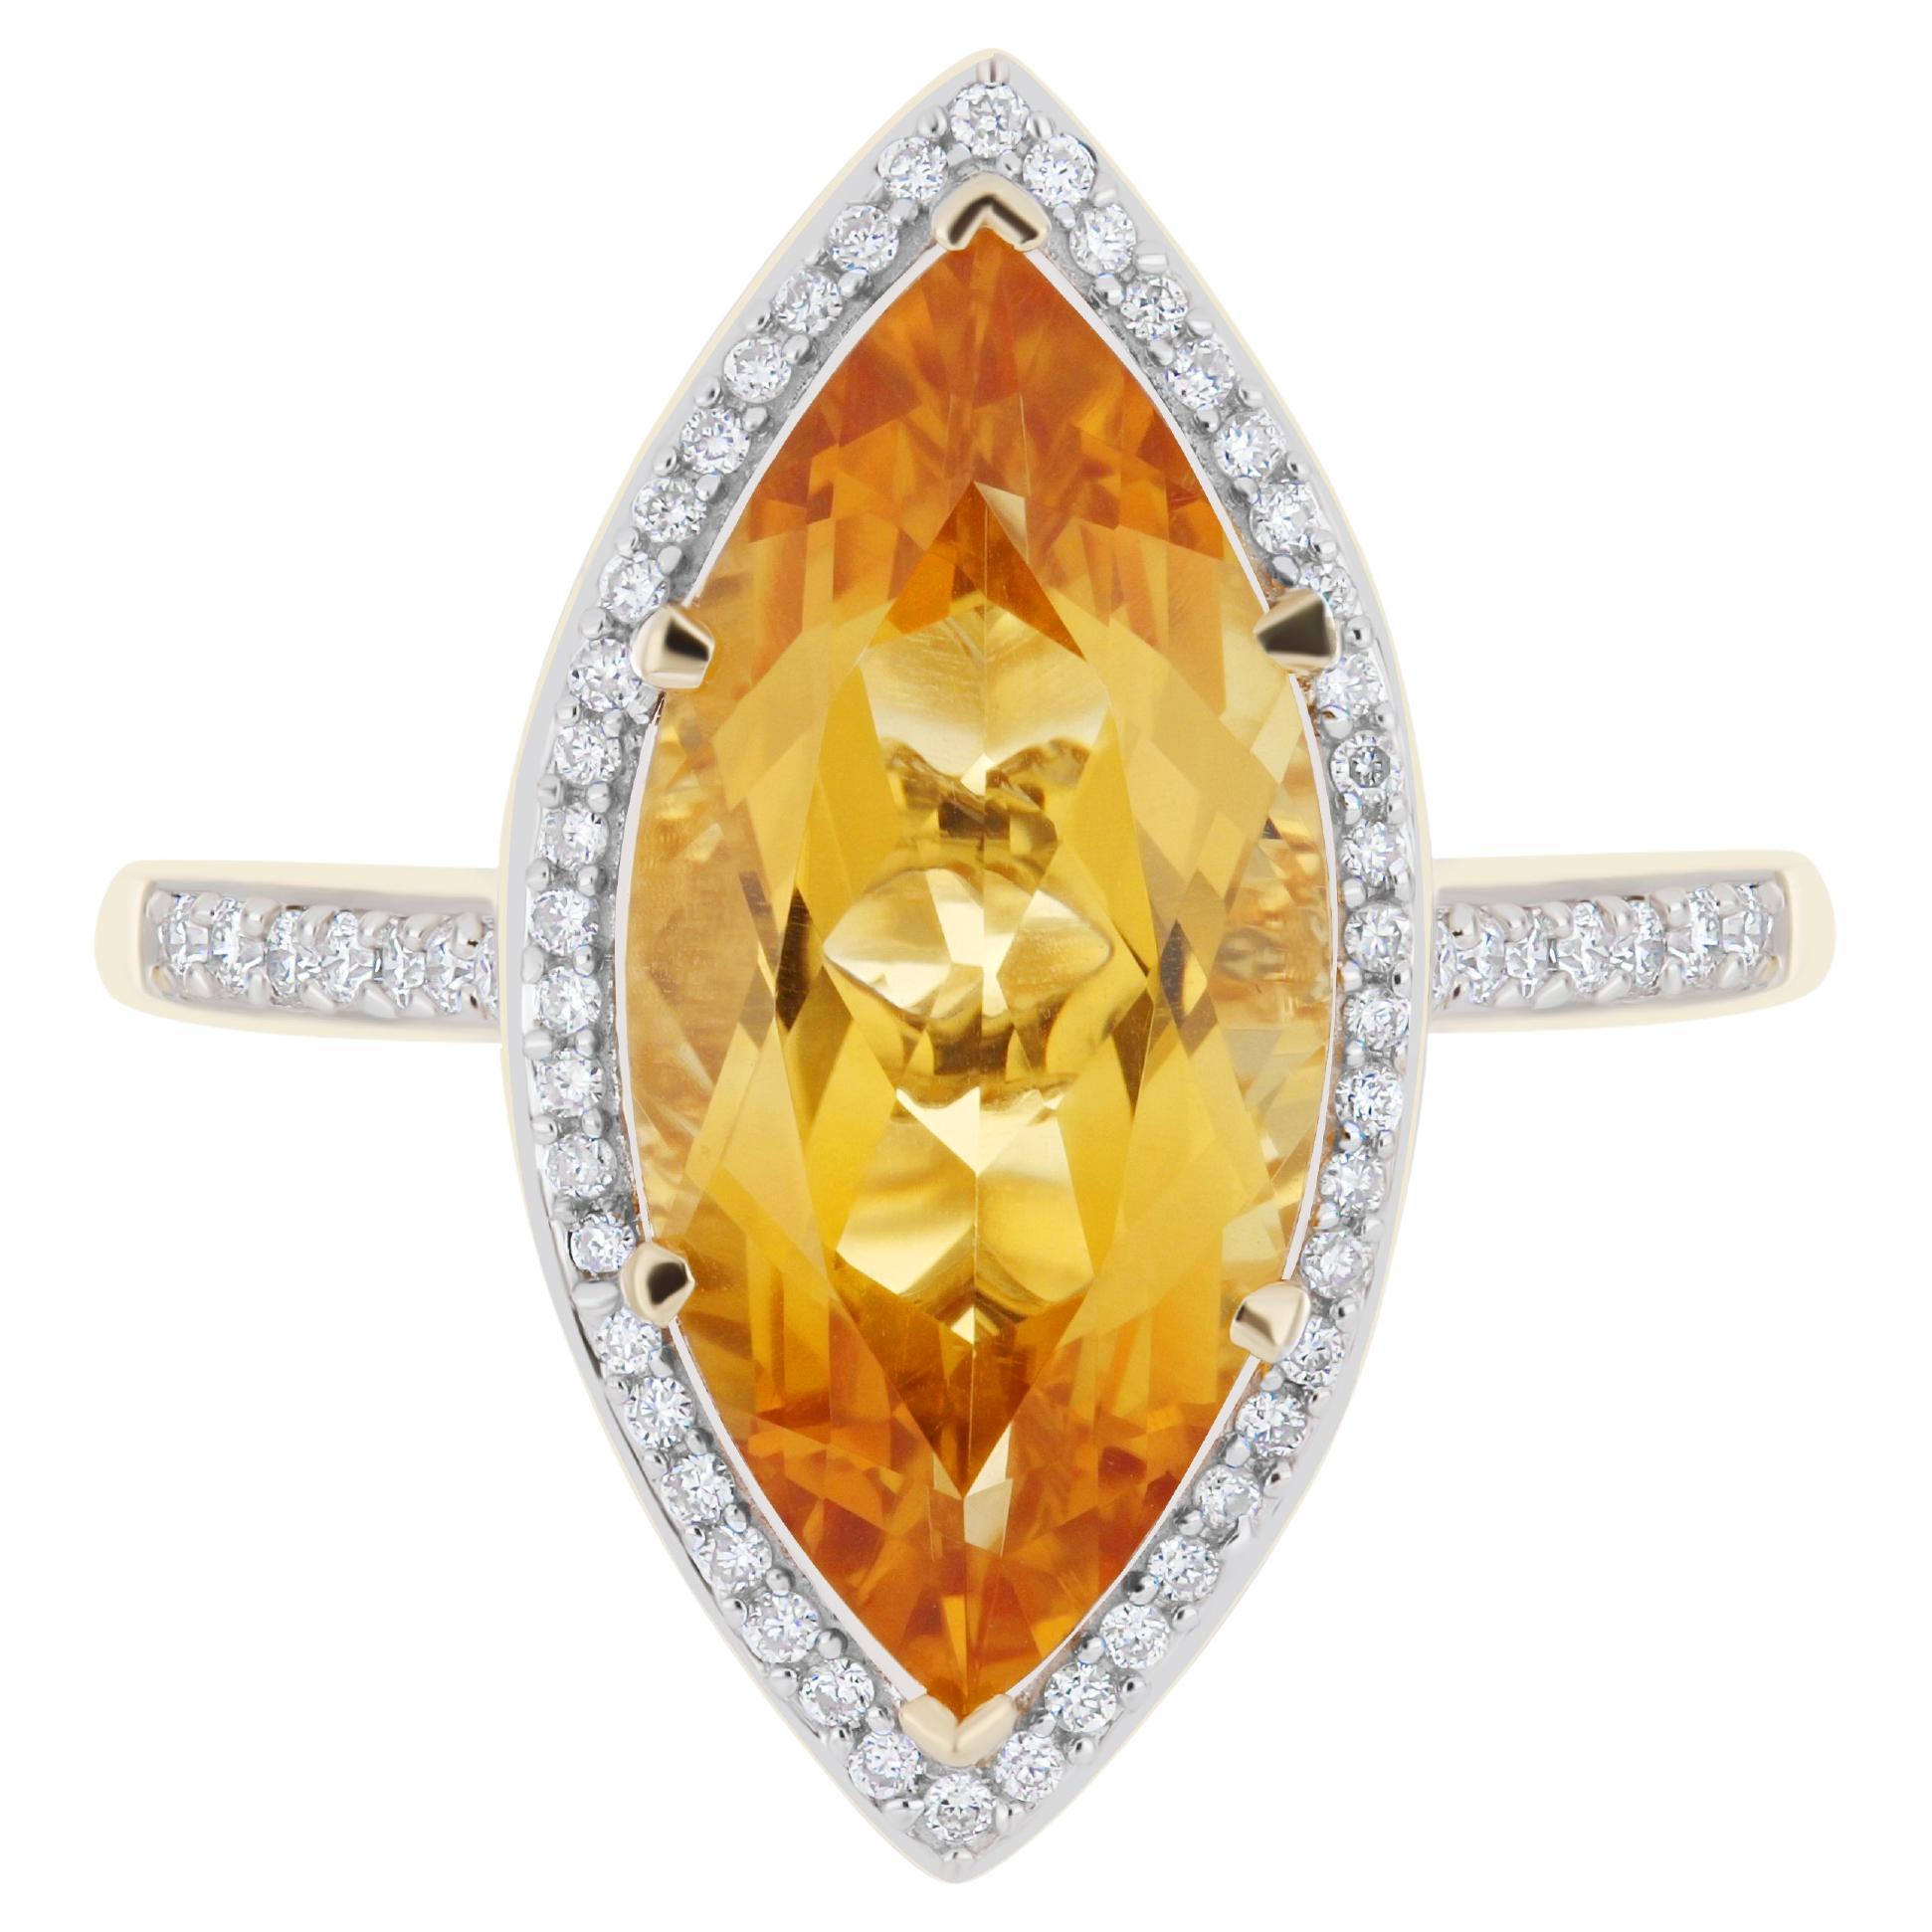 3.90cts Citrine and Diamond Ring in 14 Karat Yellow Gold Cocktail Ring for Gifts